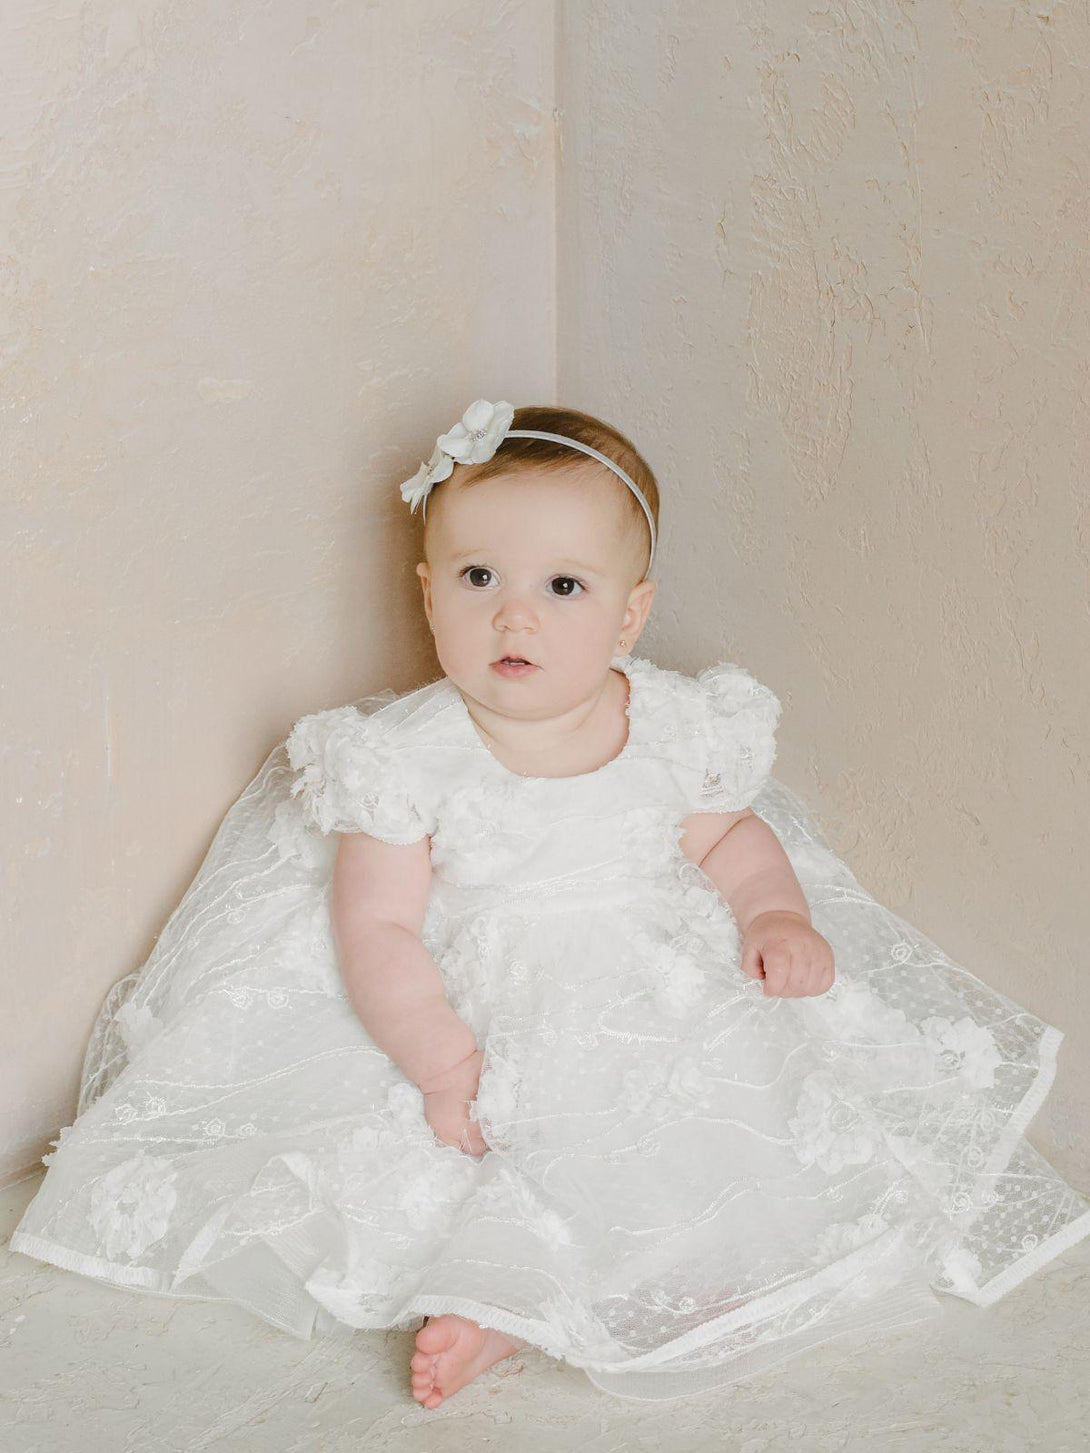 baby dresses for baptism, wedding and special occasion